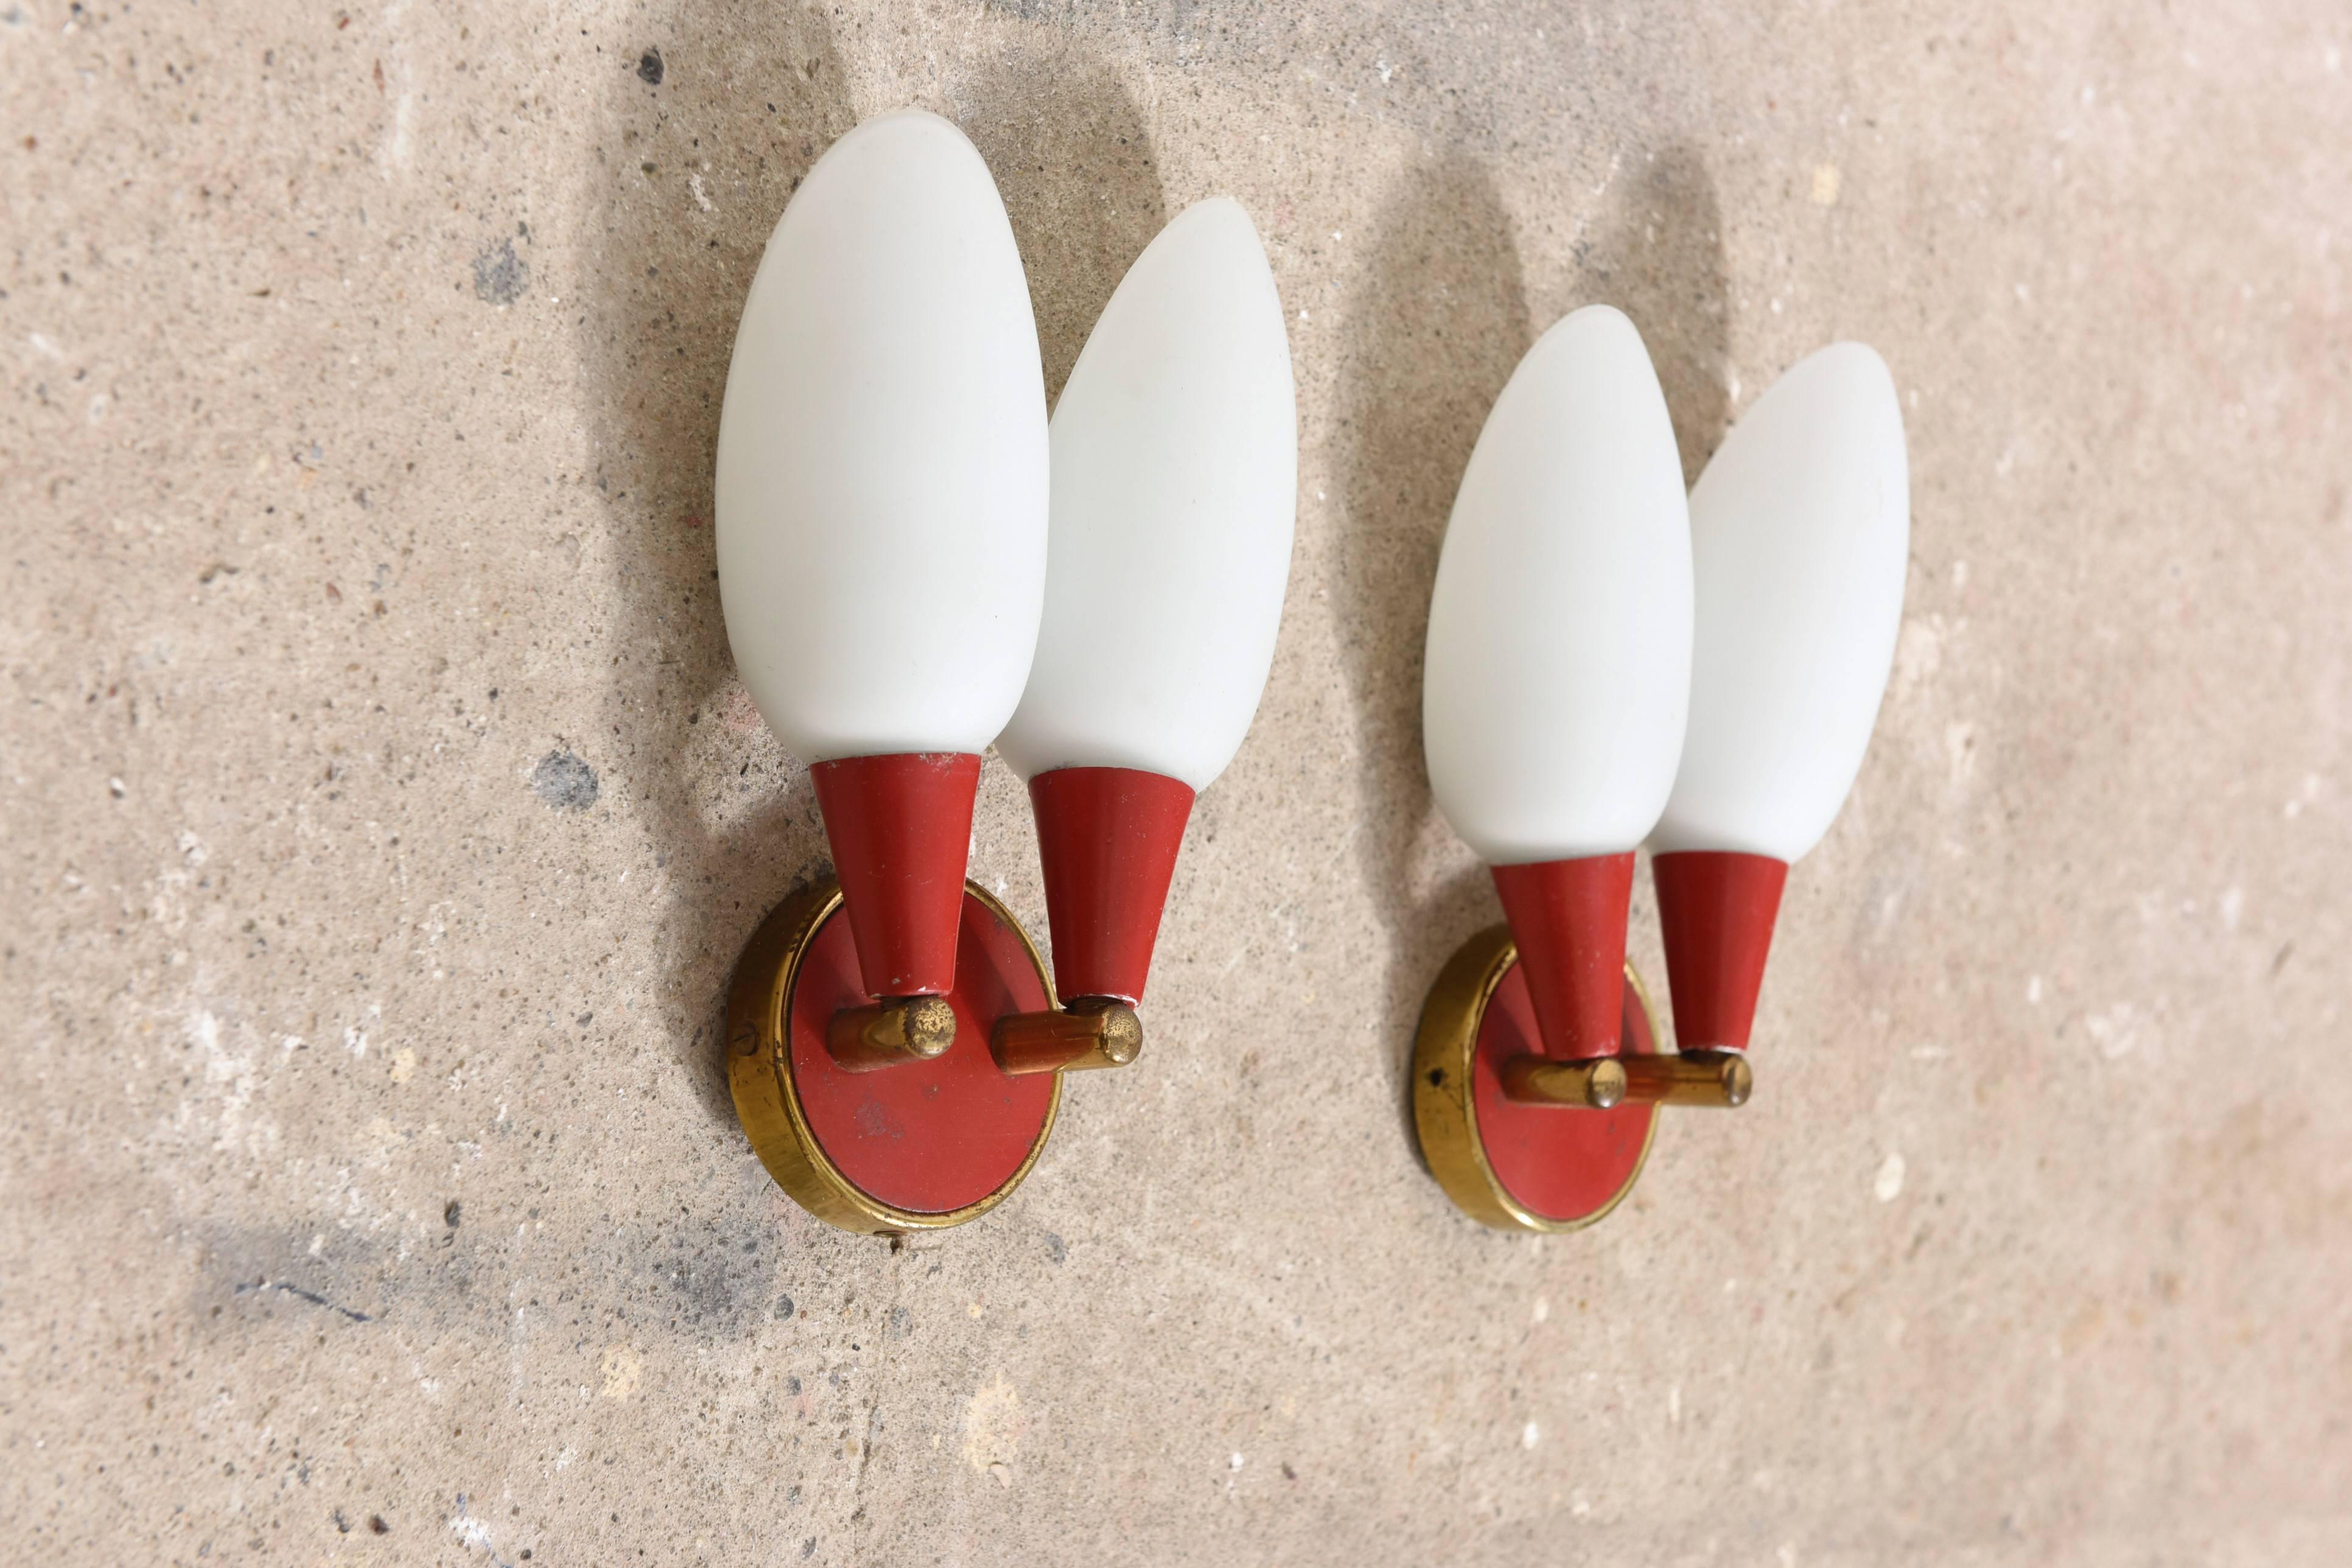 Excellent pair of wall lights, very nice elegant shape with soft light spreading.
The red coated frame with brass accents are in nice contrast with the white opaline shades.
 